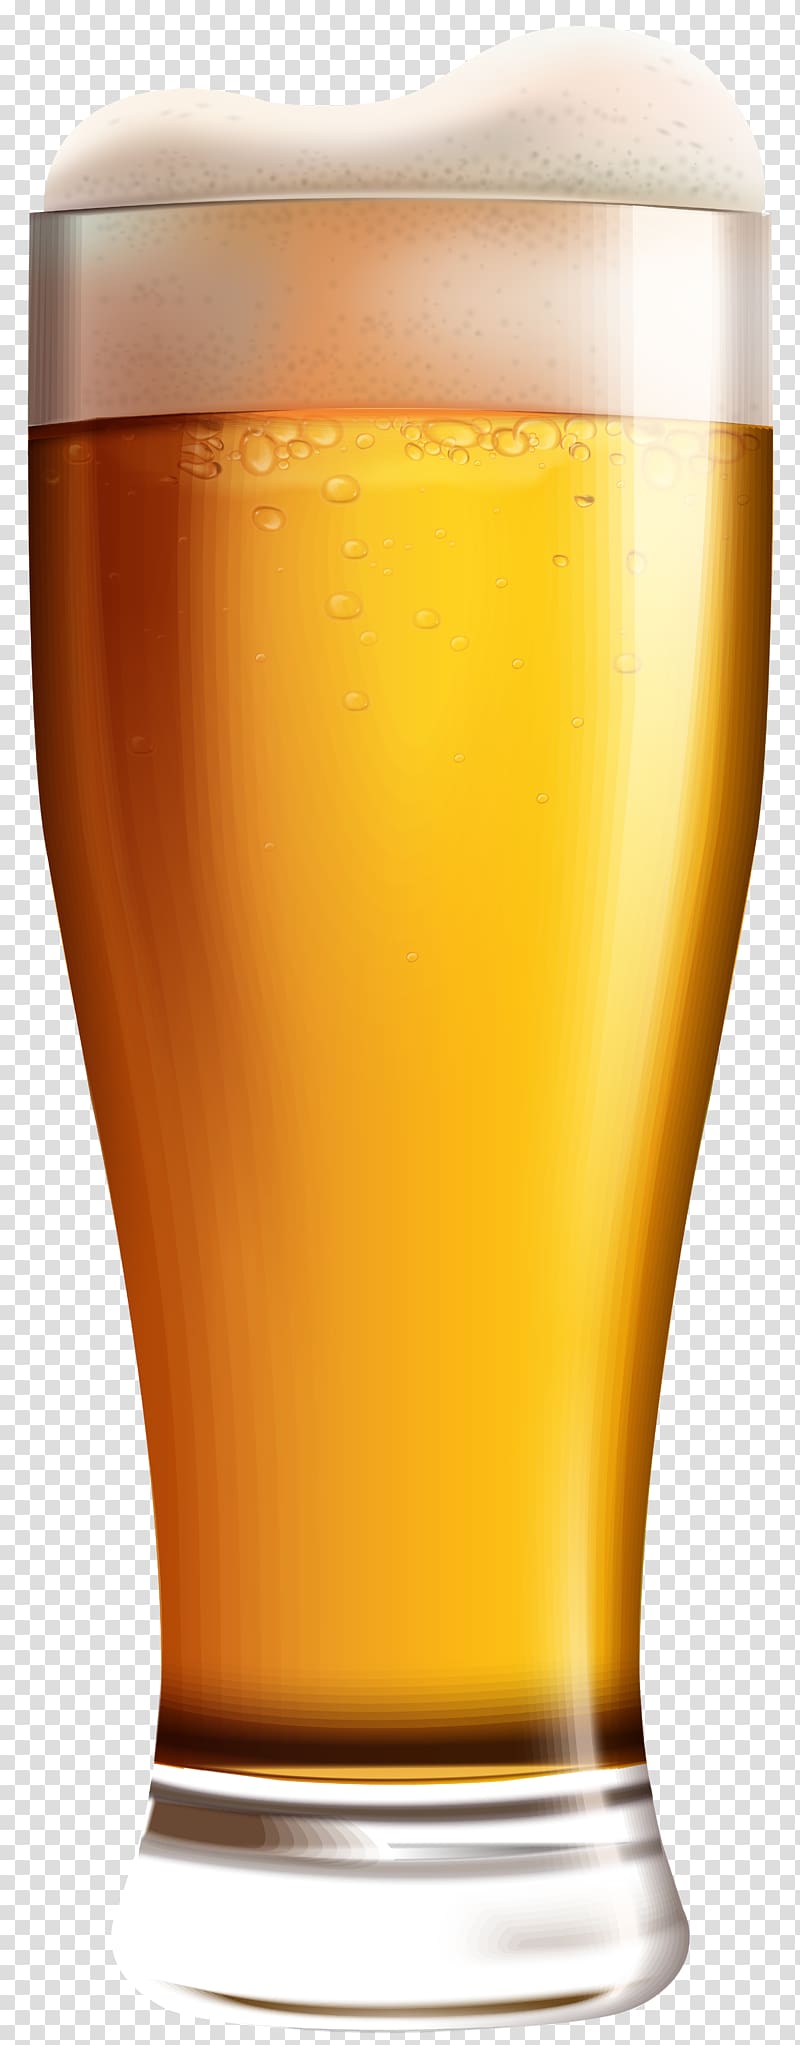 clear pilsner glass filled with beer illustration, Wheat beer Beer pong , Glass with Beer transparent background PNG clipart